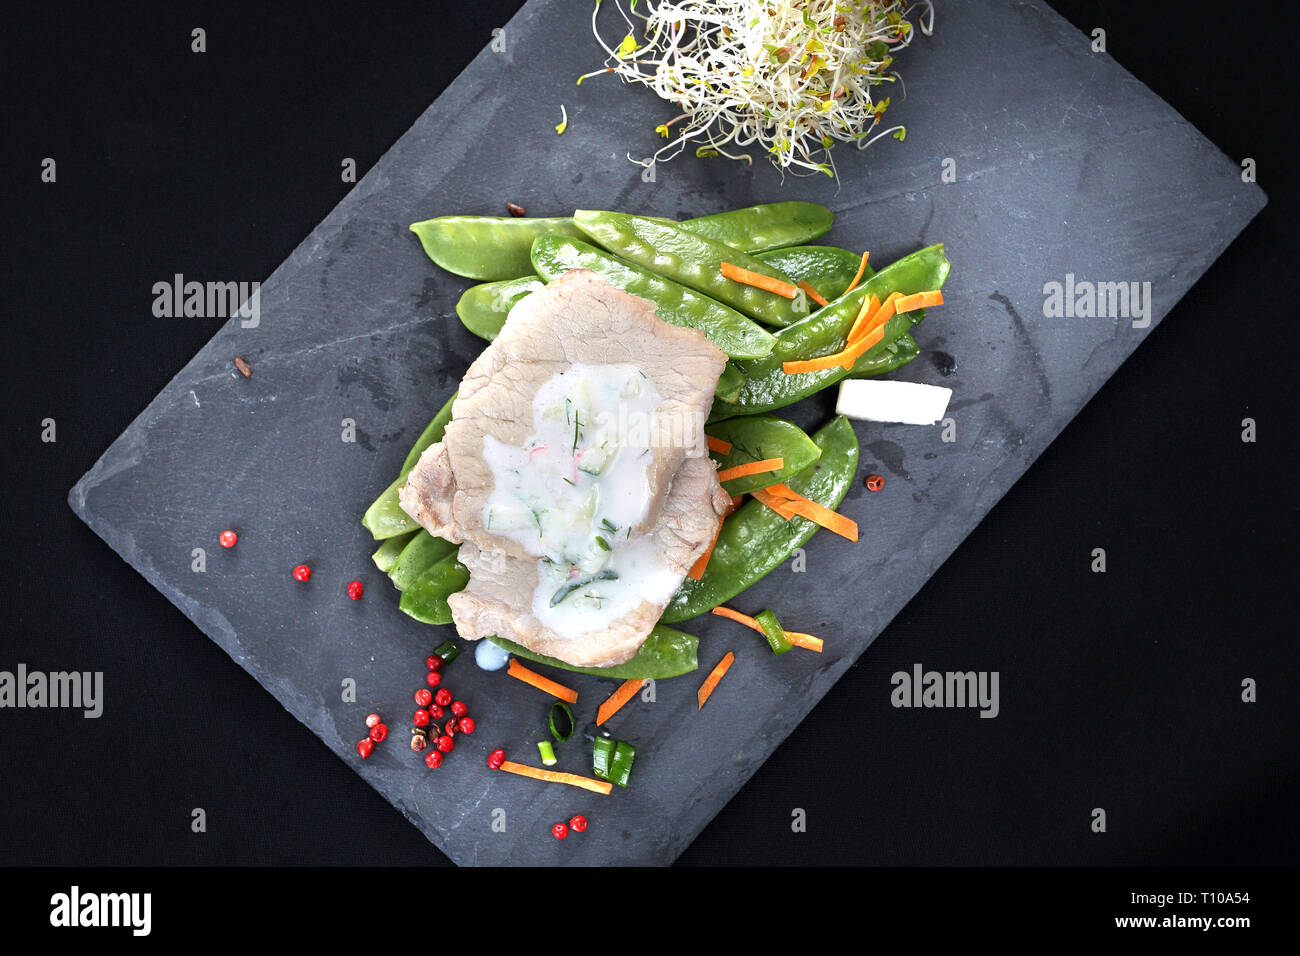 Dinner meal in a box diet. Chicken in herbs with yogurt sauce with green salad Stock Photo